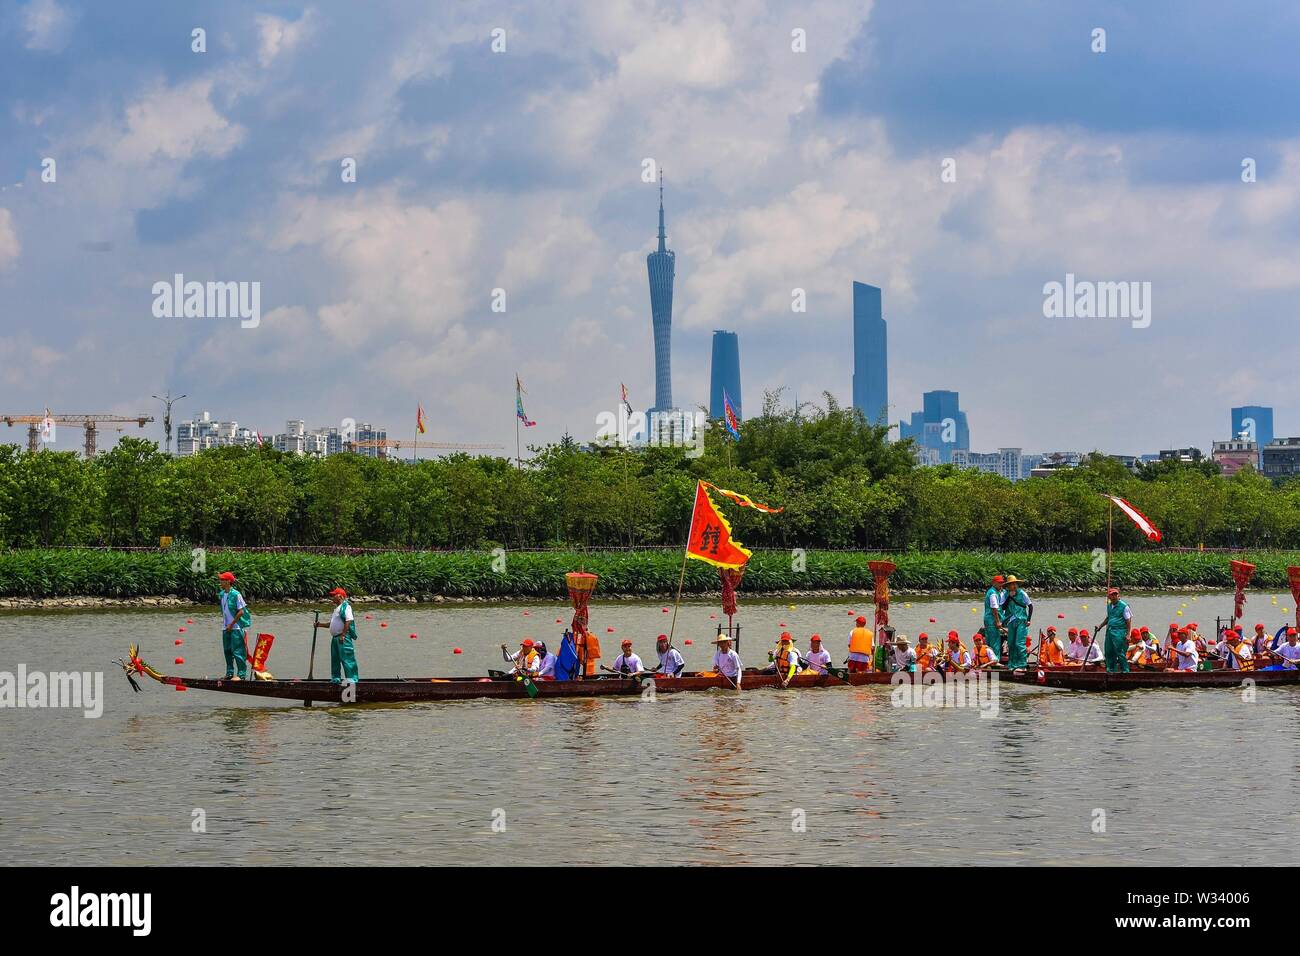 (190712) -- BEIJING, July 12, 2019 (Xinhua) -- Participants compete in a dragon boat race near the Haizhu wetland in Guangzhou, capital of south China's Guangdong Province, June 6, 2019. Located in south China, Guangdong Province faces the South China Sea and borders Hunan and Jiangxi provinces to the north. It boasts the well-known Pearl River Delta, which is composed of three upstream rivers and a large number of islands. Due to the climate, Guangdong is famous for a diversified ecological system and environment. In recent years, by upholding the principle of green development, Guangdong Stock Photo